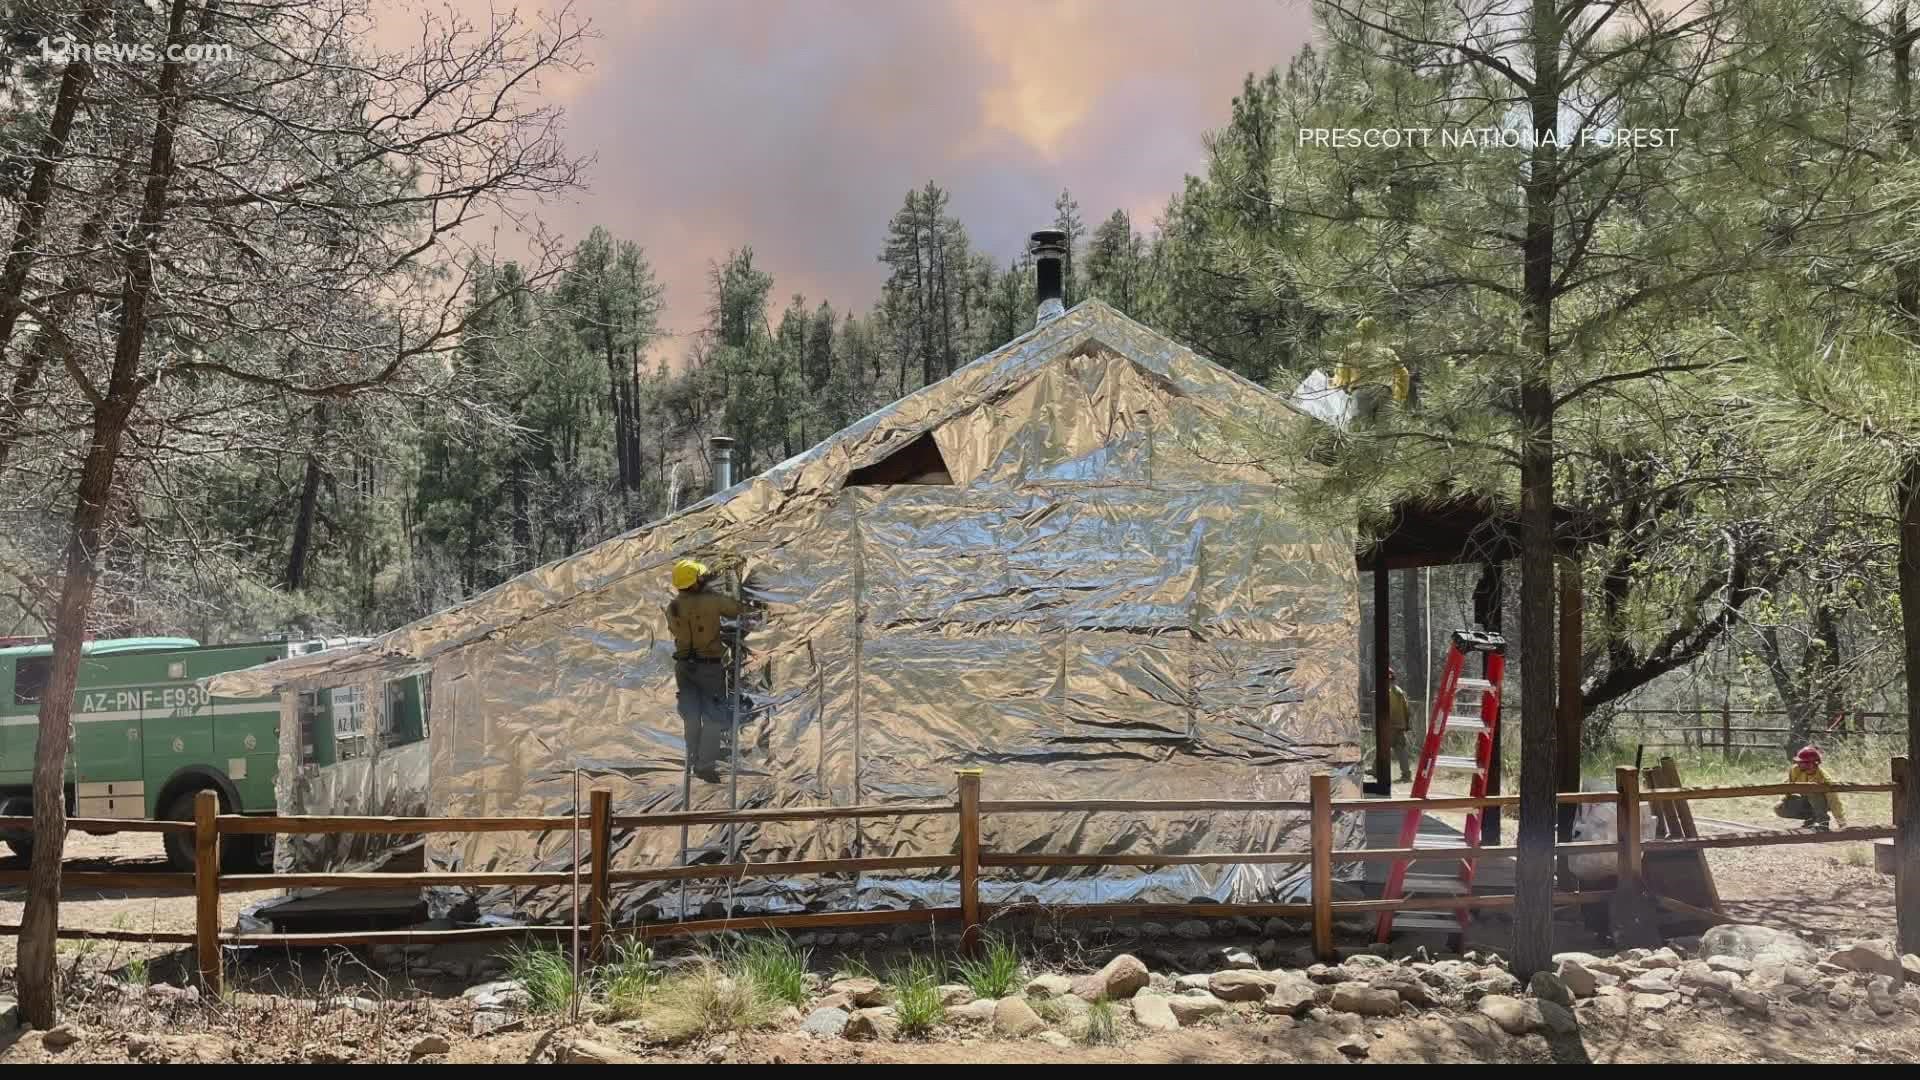 Crews are also working to put out the Tunnel Fire burning northeast of Flagstaff. Evacuated residents can return to their homes.